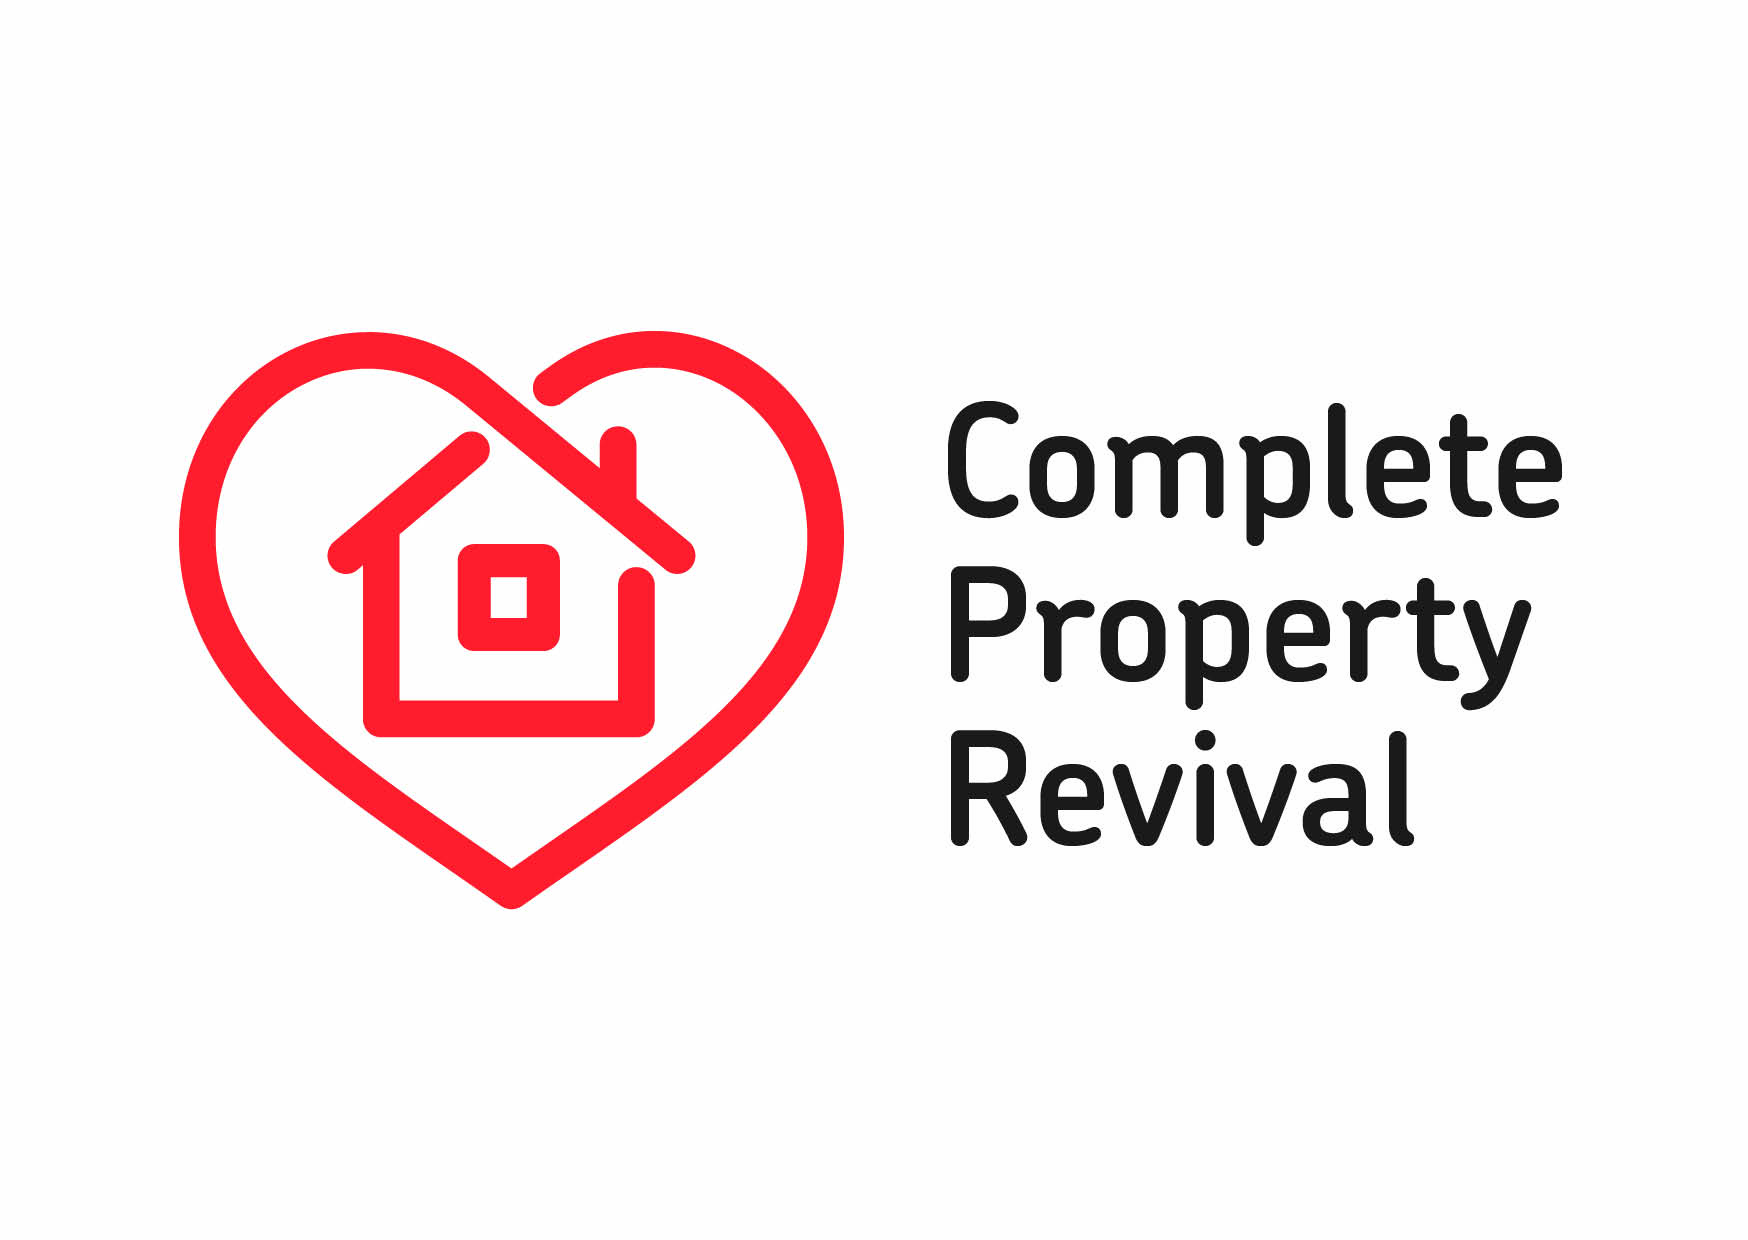 Complete property Revival